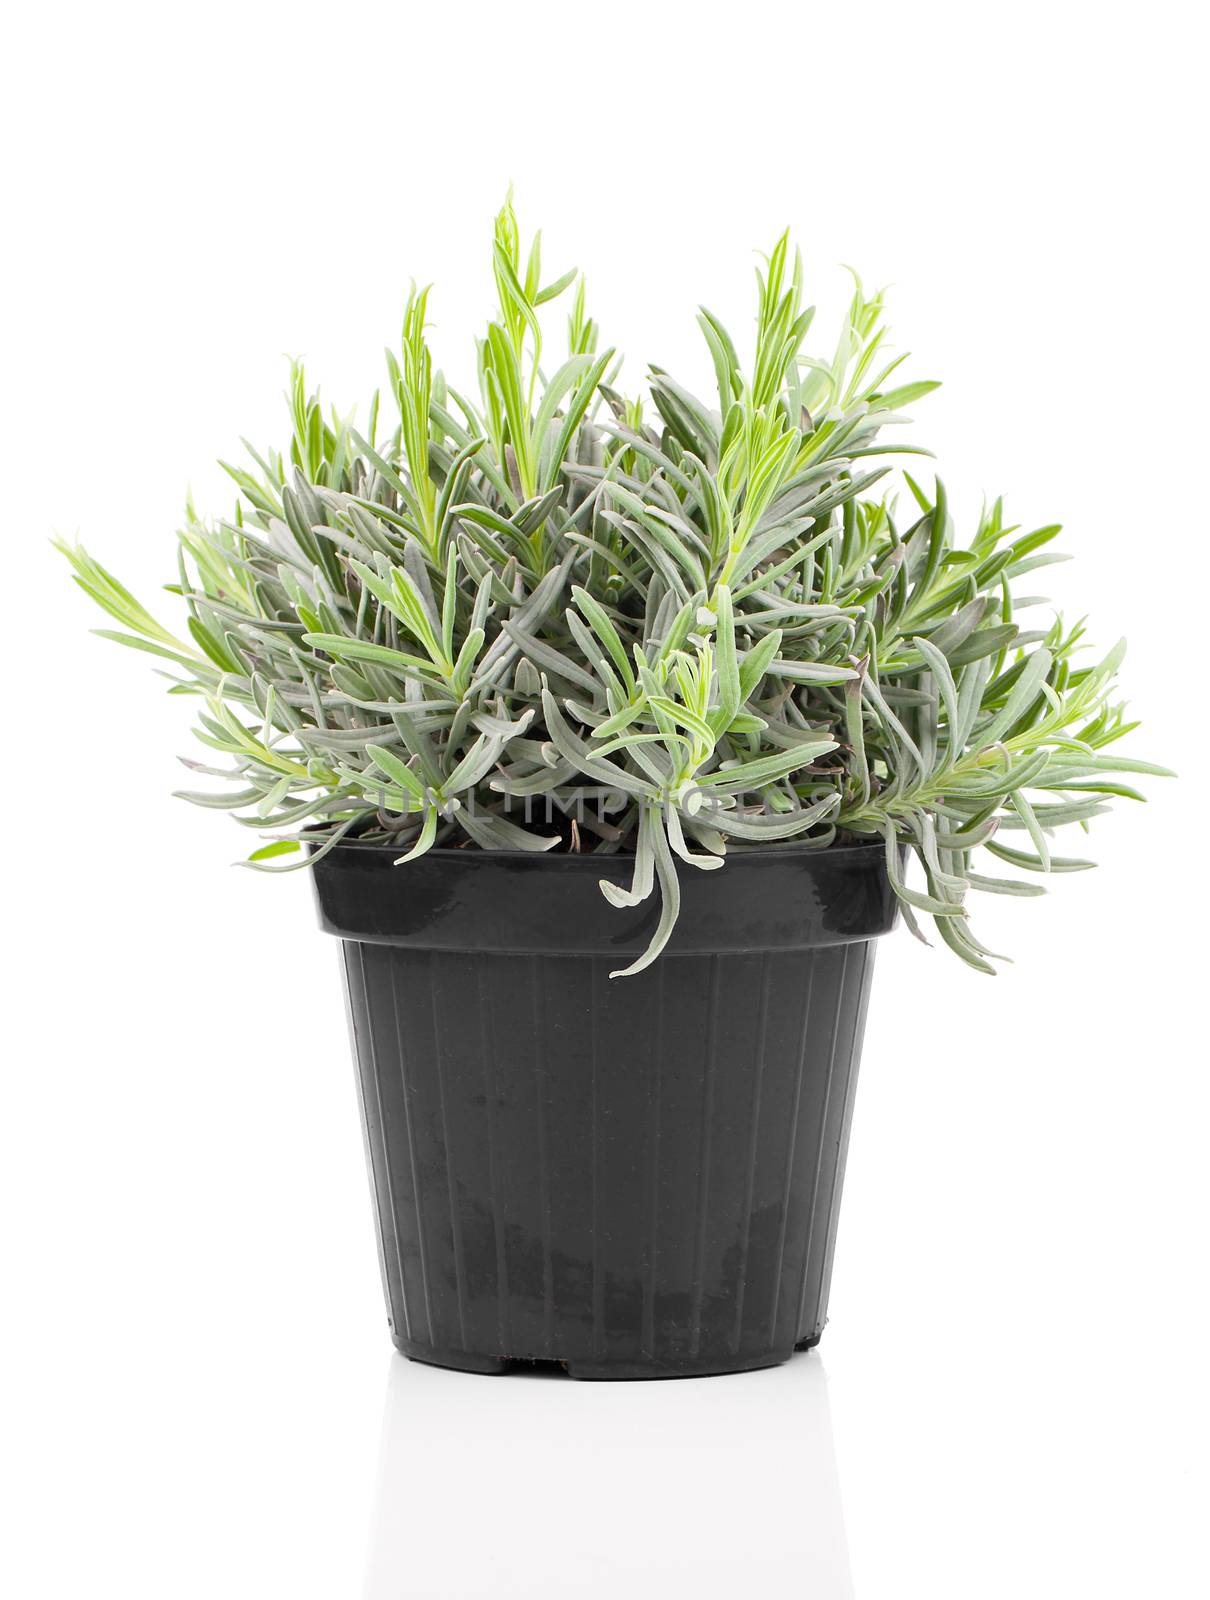 Lavender in a pot, on white background by motorolka